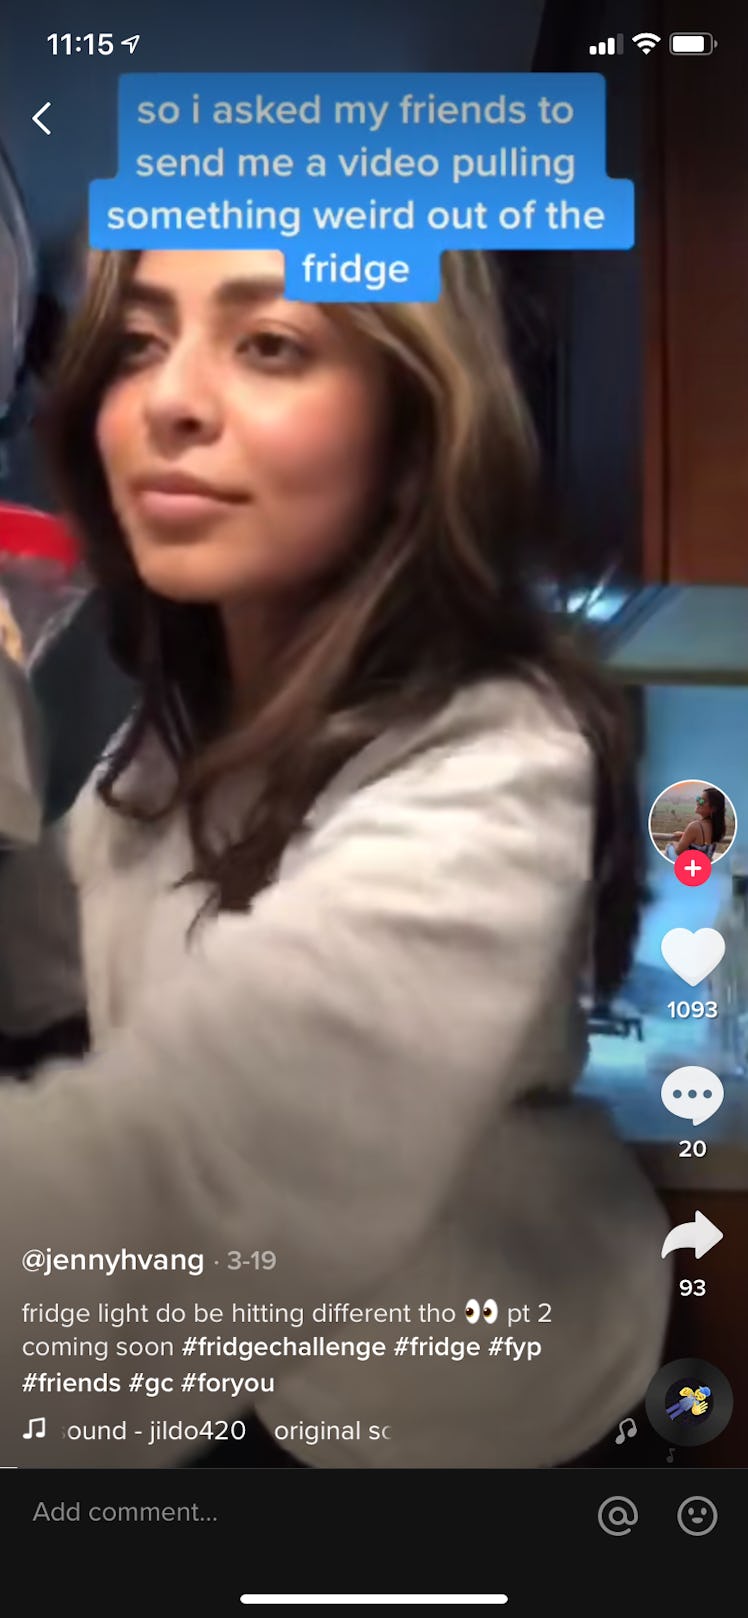 A young woman pulls a laptop out of her fridge while recording the #fridgechallenge on TikTok.